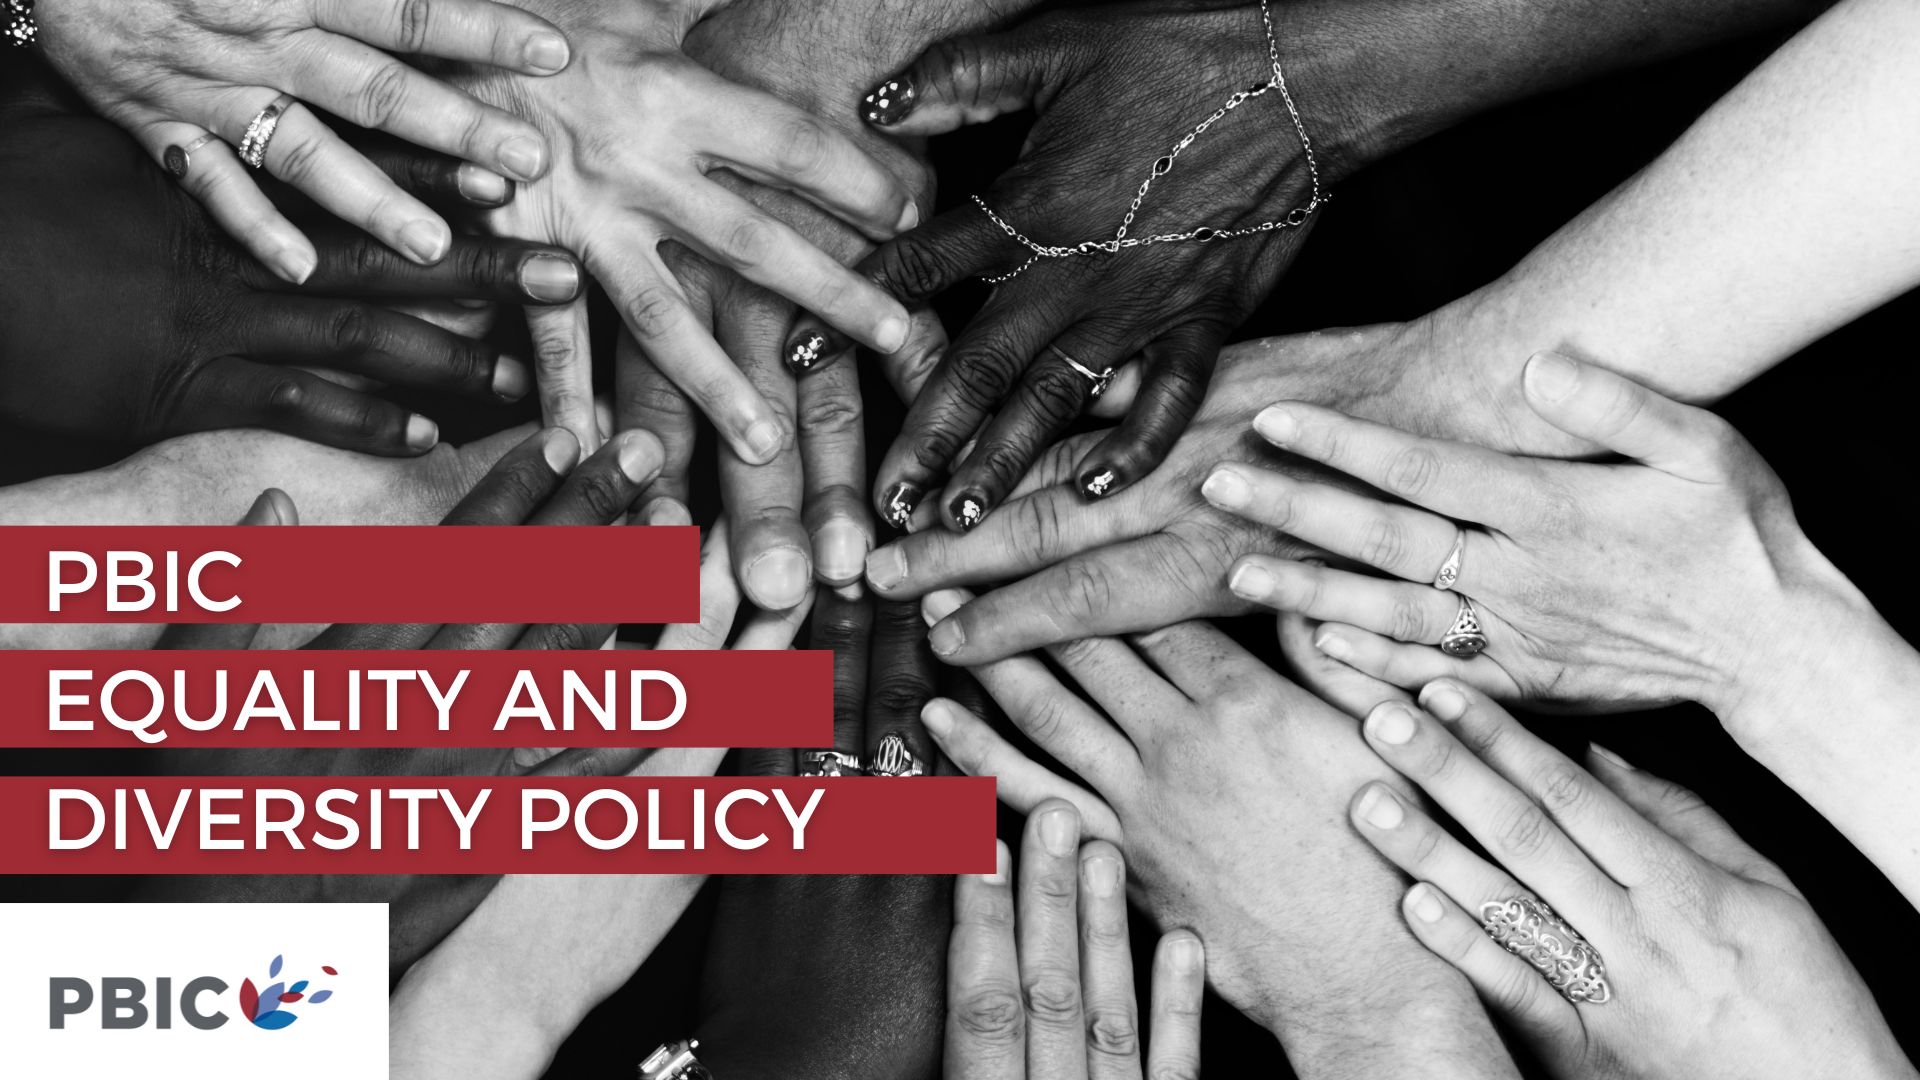 PBIC Equality and Diversity Policy